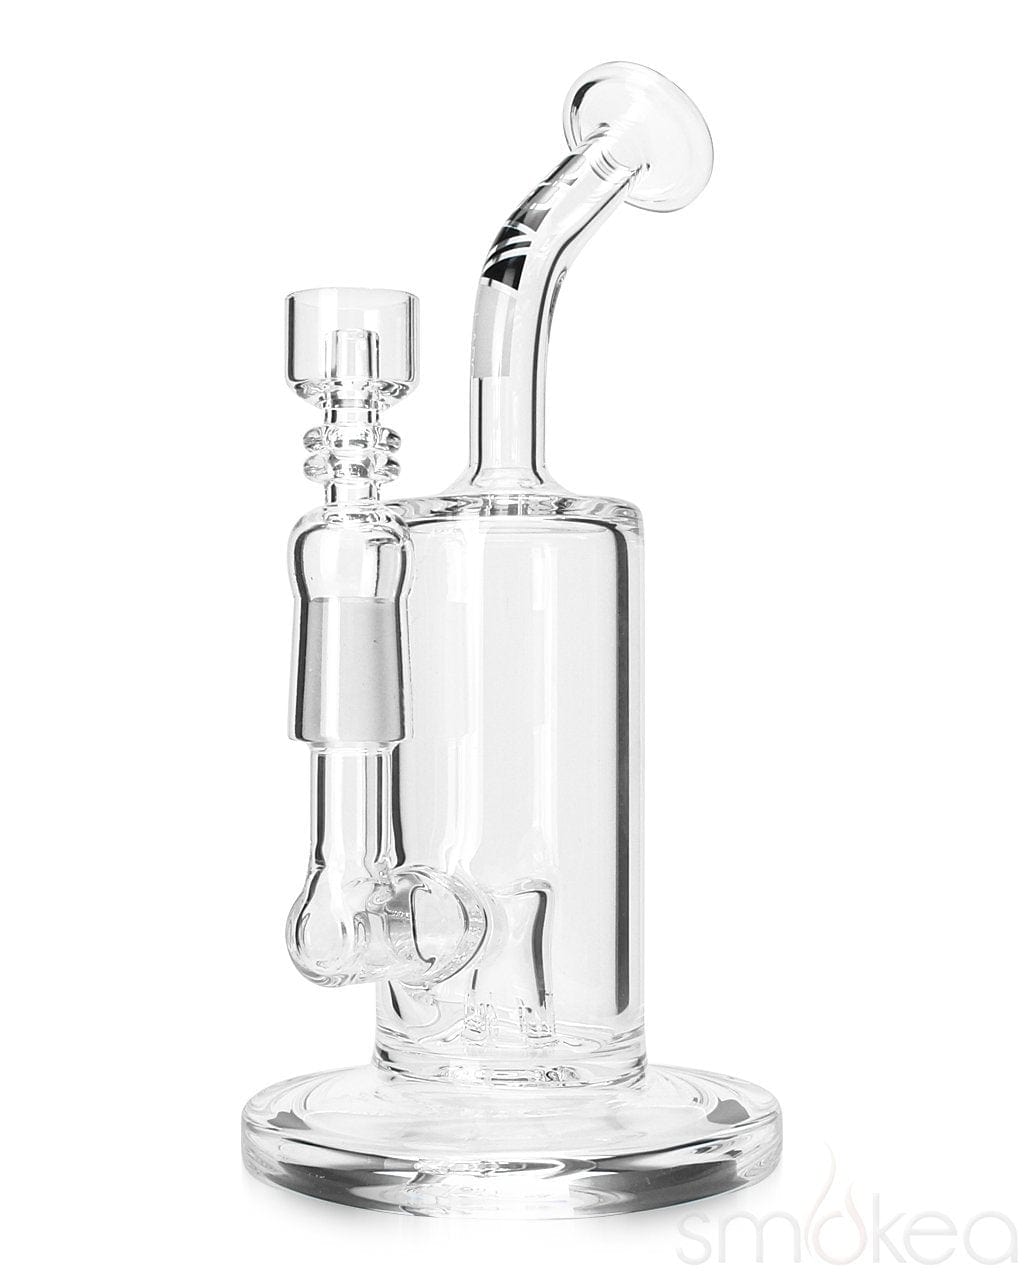 Wholesale Luminous Glass Beaker Bong With 14mm Bowl Joint And 13cm Downstem  Ideal For Smoking, Dab Rig, Hookah, And Ash Catcher From Ucer_bio, $24.3 |  DHgate.Com